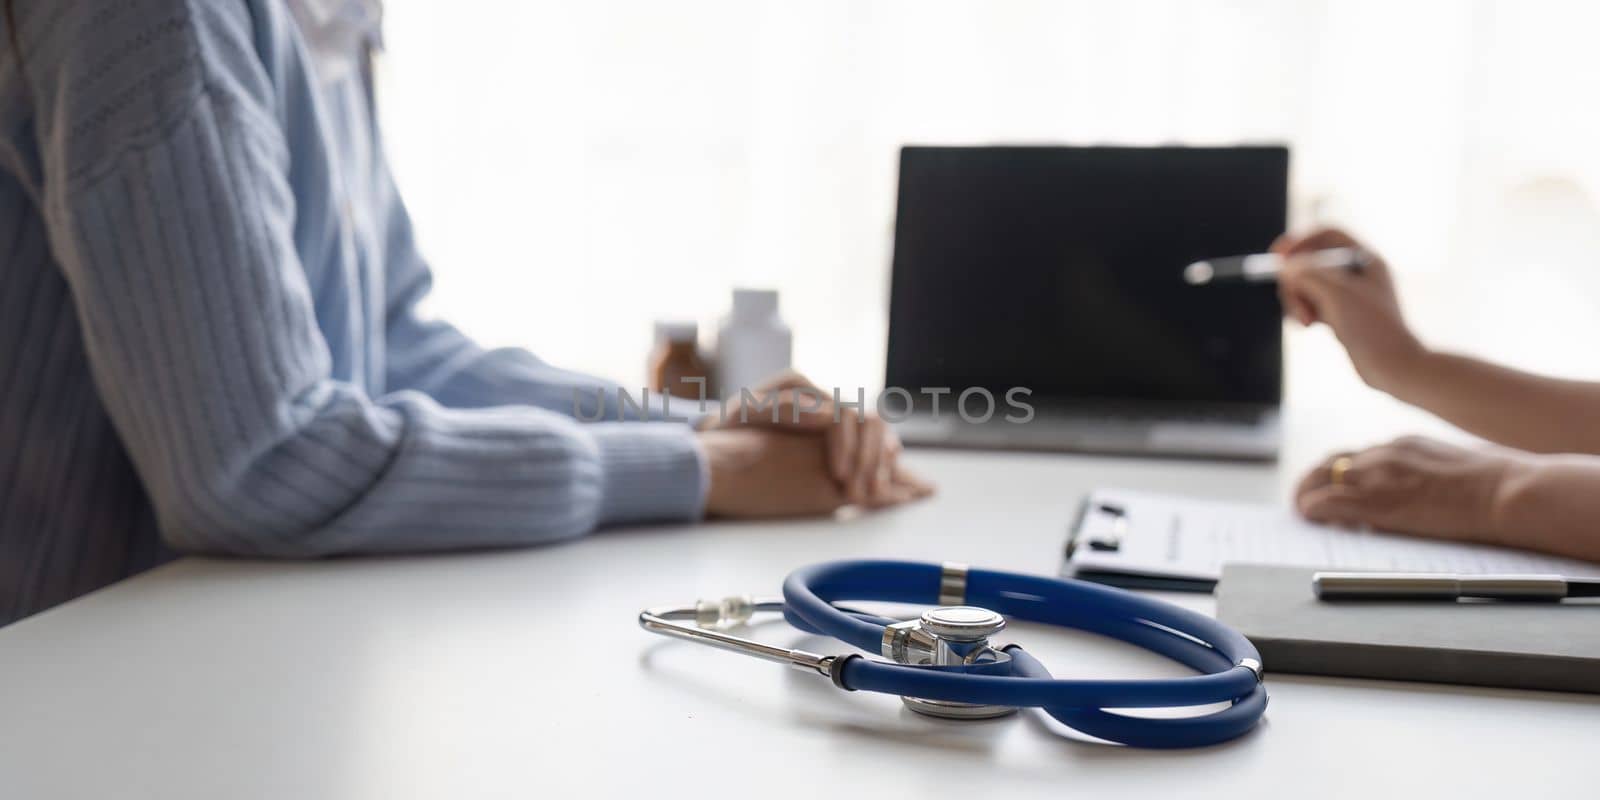 medical consultation - doctor talking to patient in clinic office on laptop computer. focus on stethoscope. by nateemee